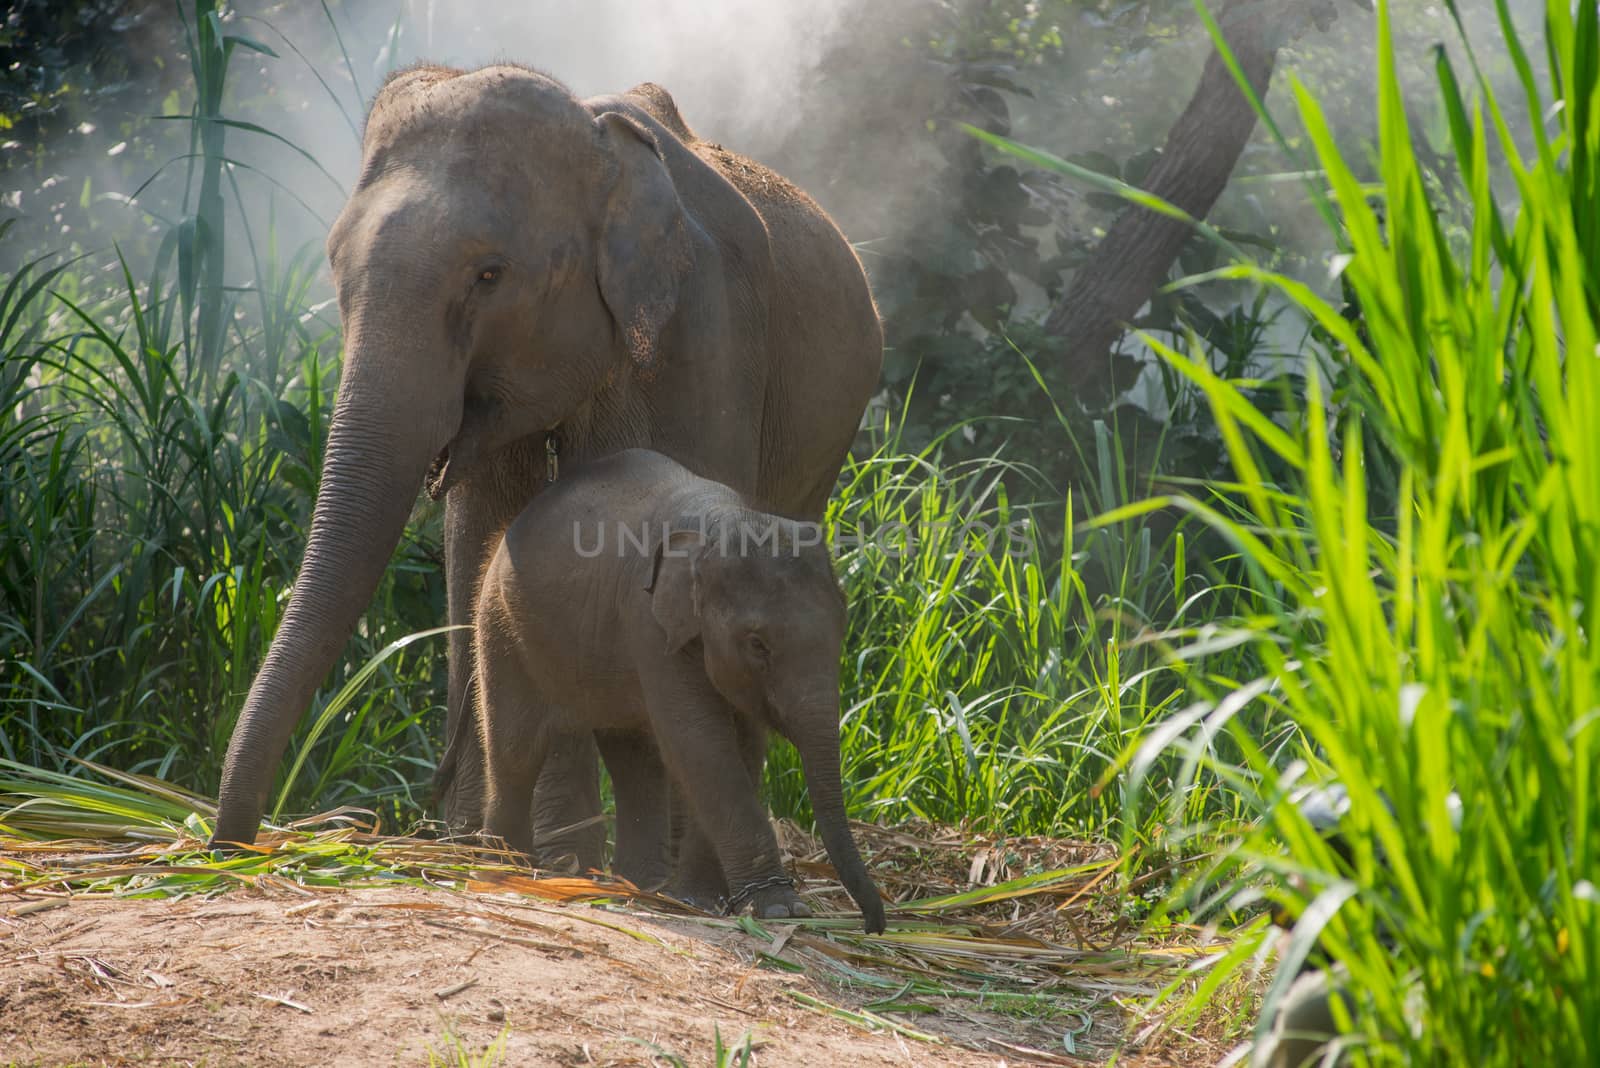 A young elephant right next to an adult one. by chanwity